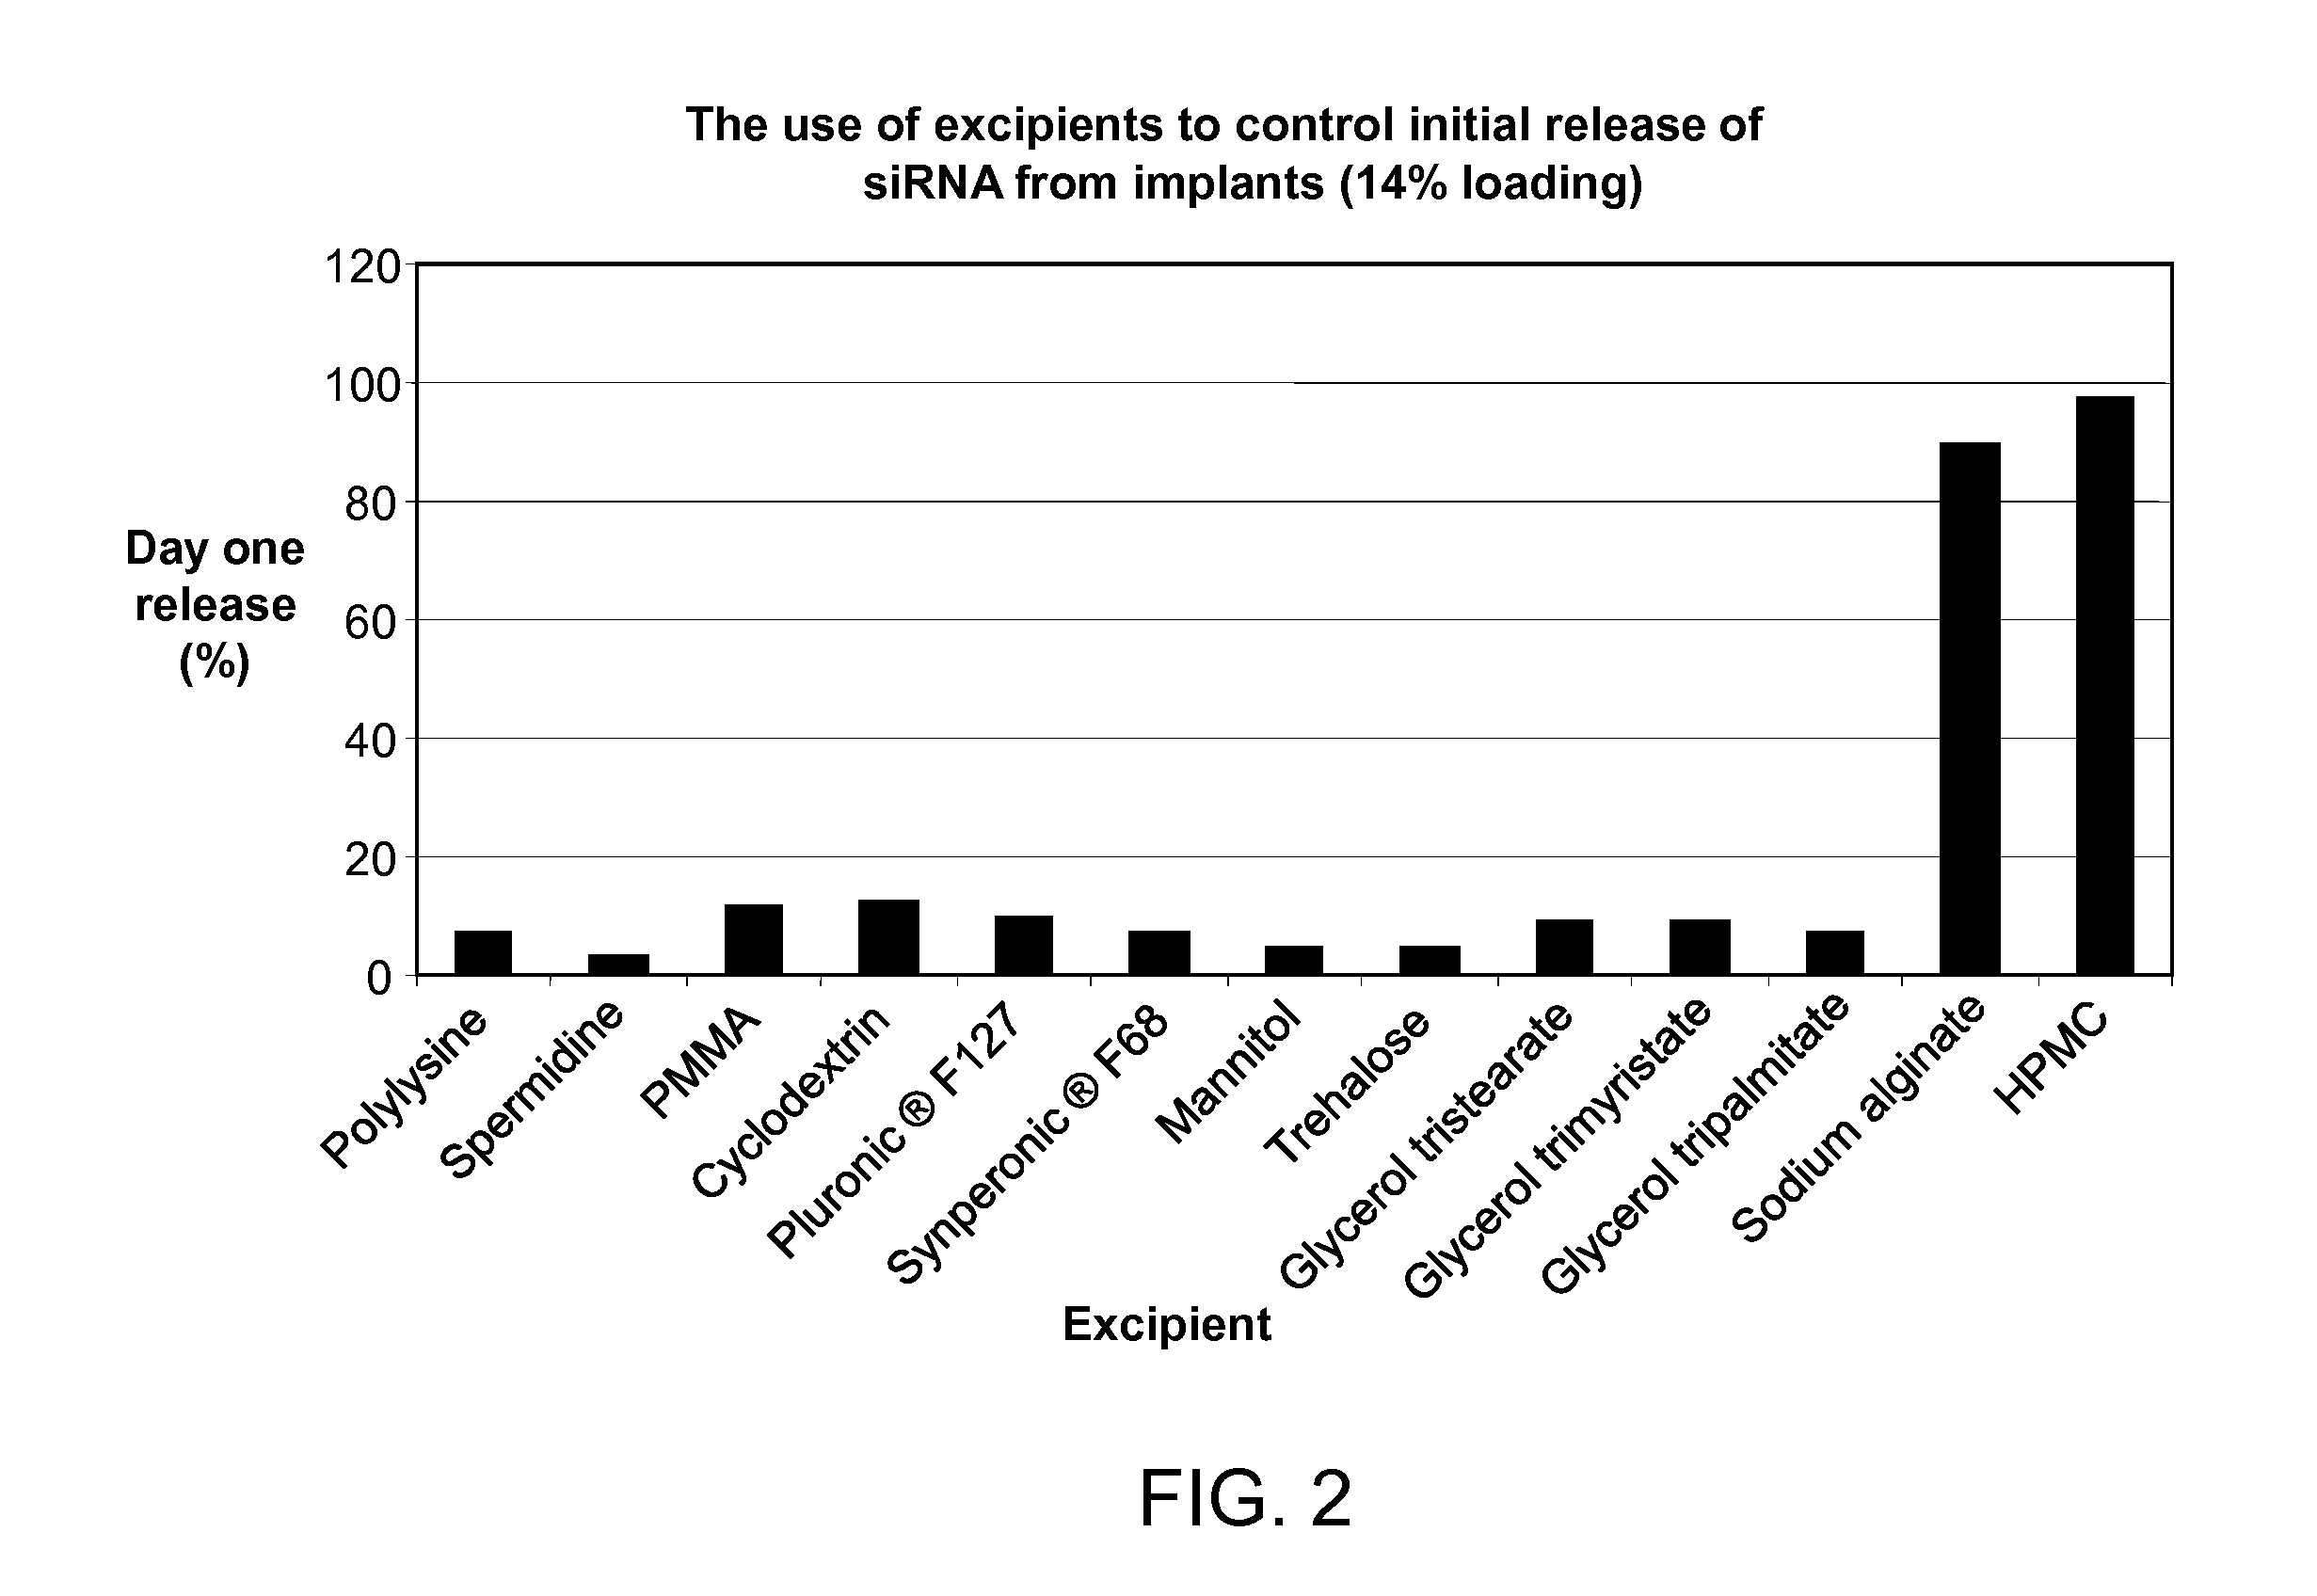 METHOD OF CONTROLLING INITIAL DRUG RELEASE OF siRNA FROM SUSTAINED-RELEASE IMPLANTS